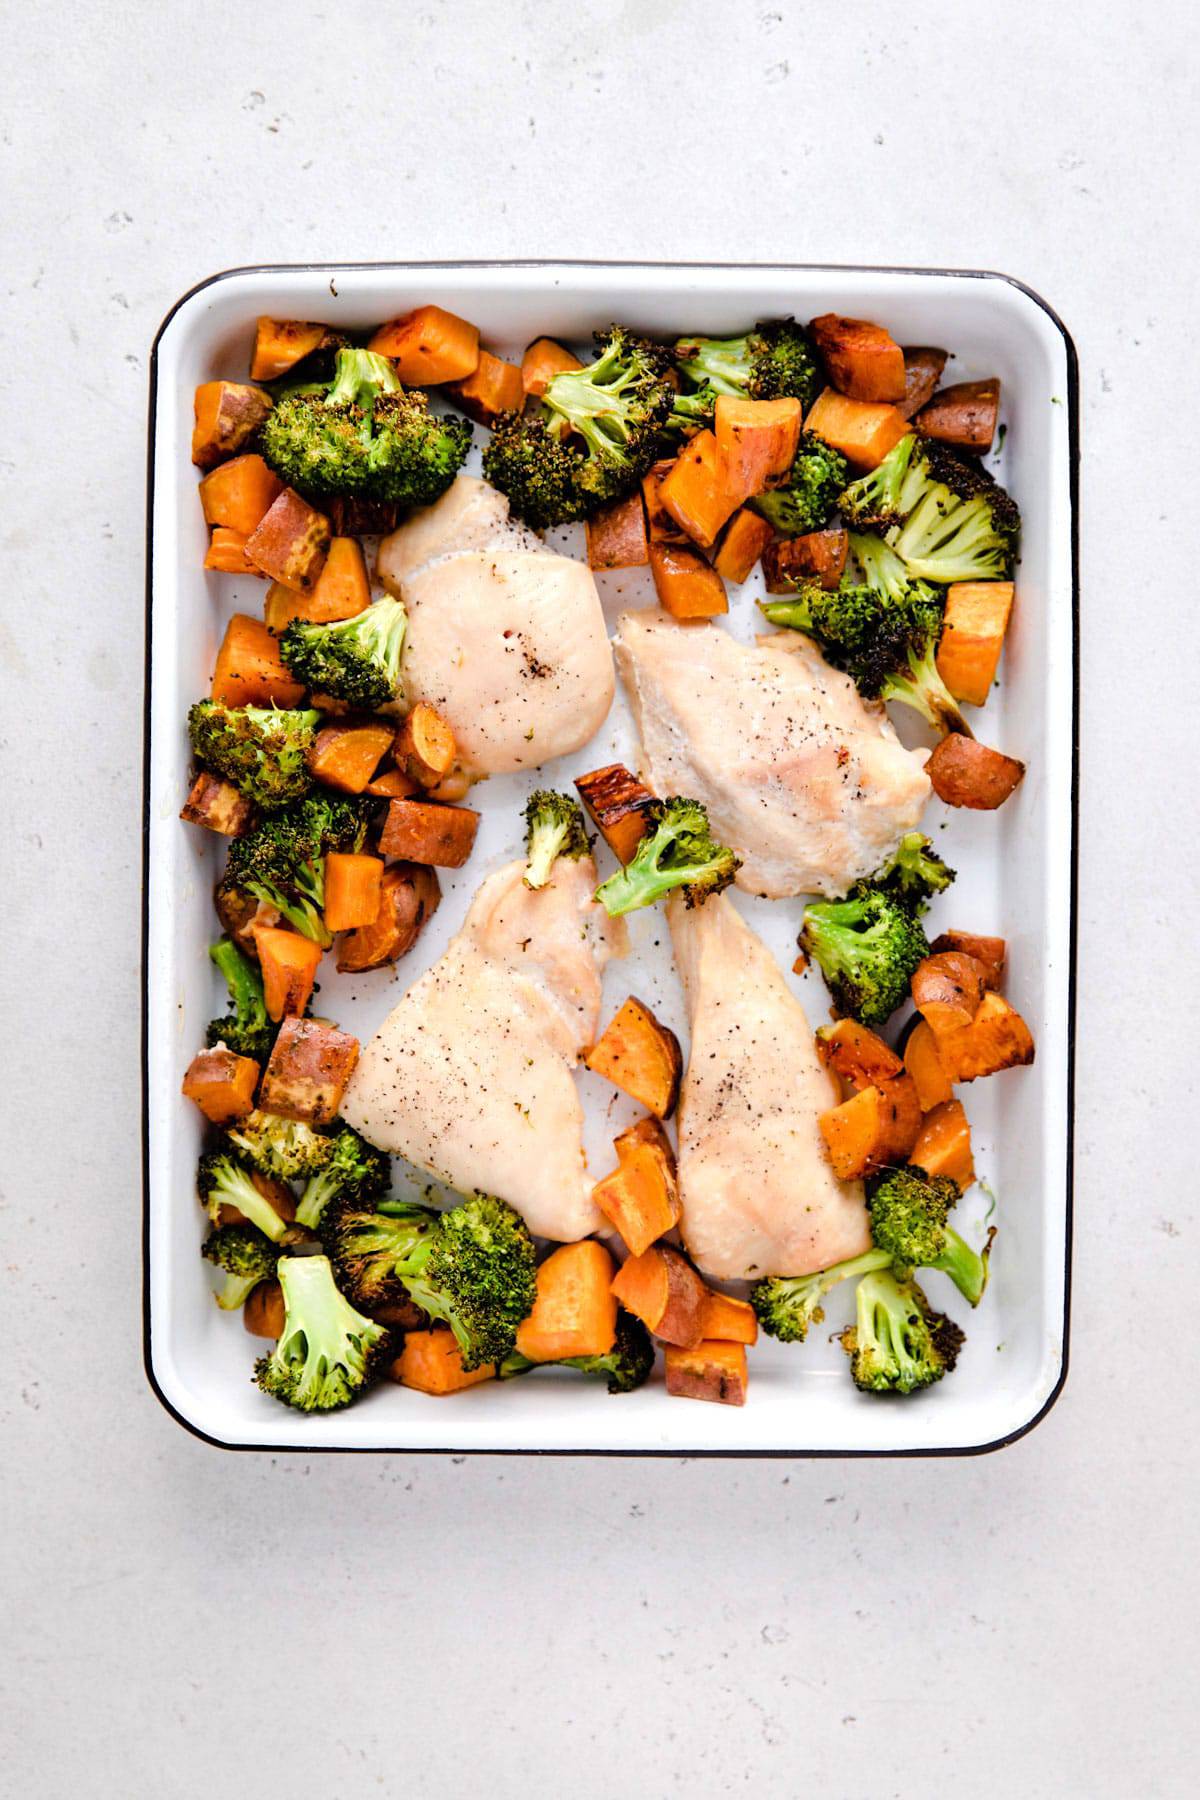 A sheet pan with chicken and roasted vegetables.